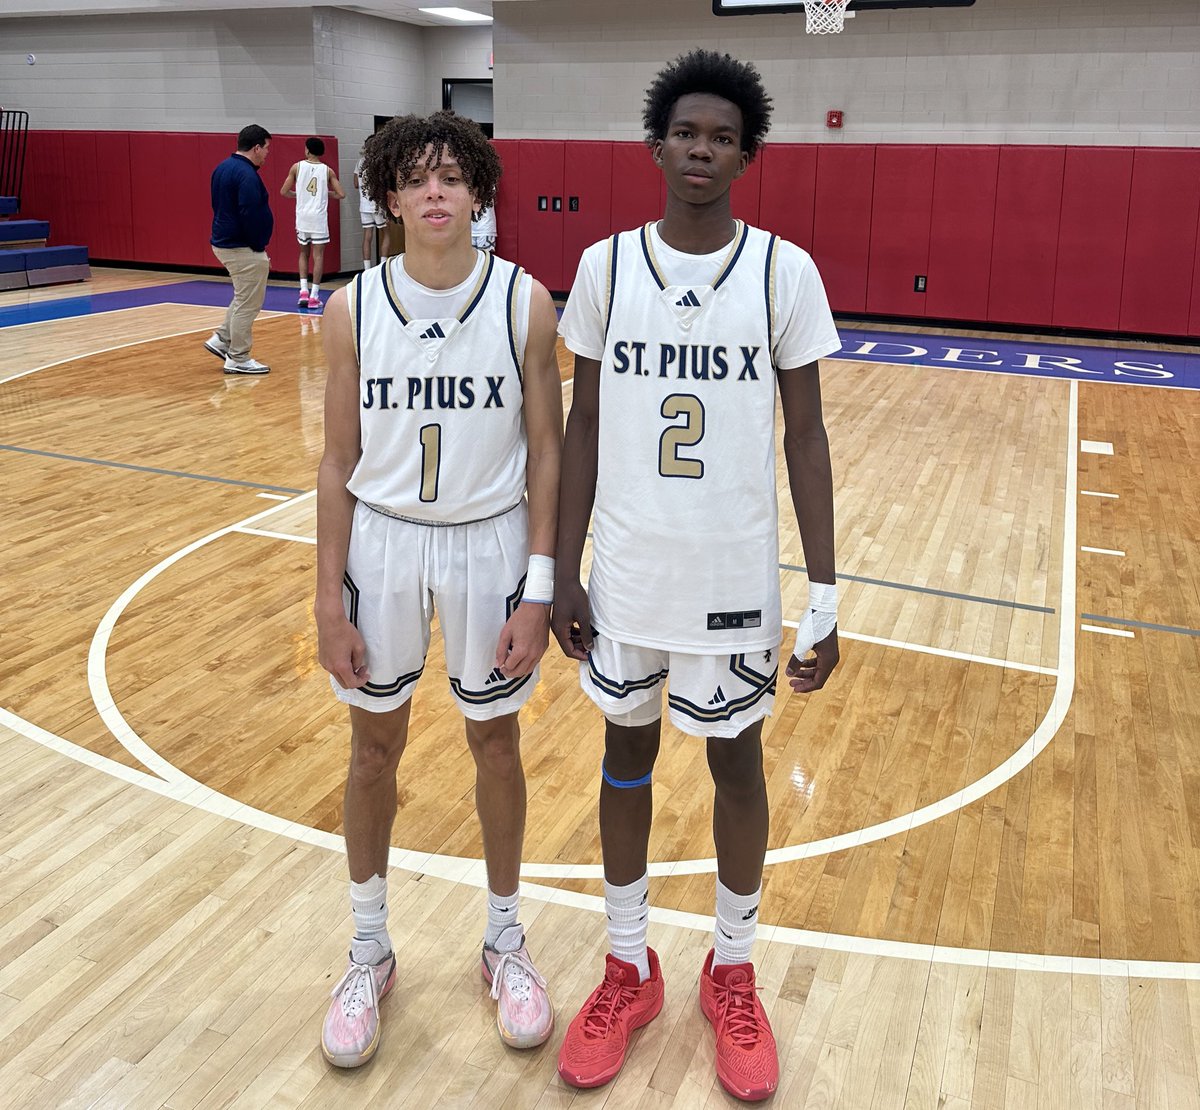 @spxbasketball defeats North Atlanta 55-52 to advance 6A Region 4 championship game. The Golden Lions were led by the backcourt play of 2025’ G @aidenportee & 2026 G @Harris1Reynolds. Reynolds finished with 13p and Portee finished with a game high 18p in the win. St Pius moves to…